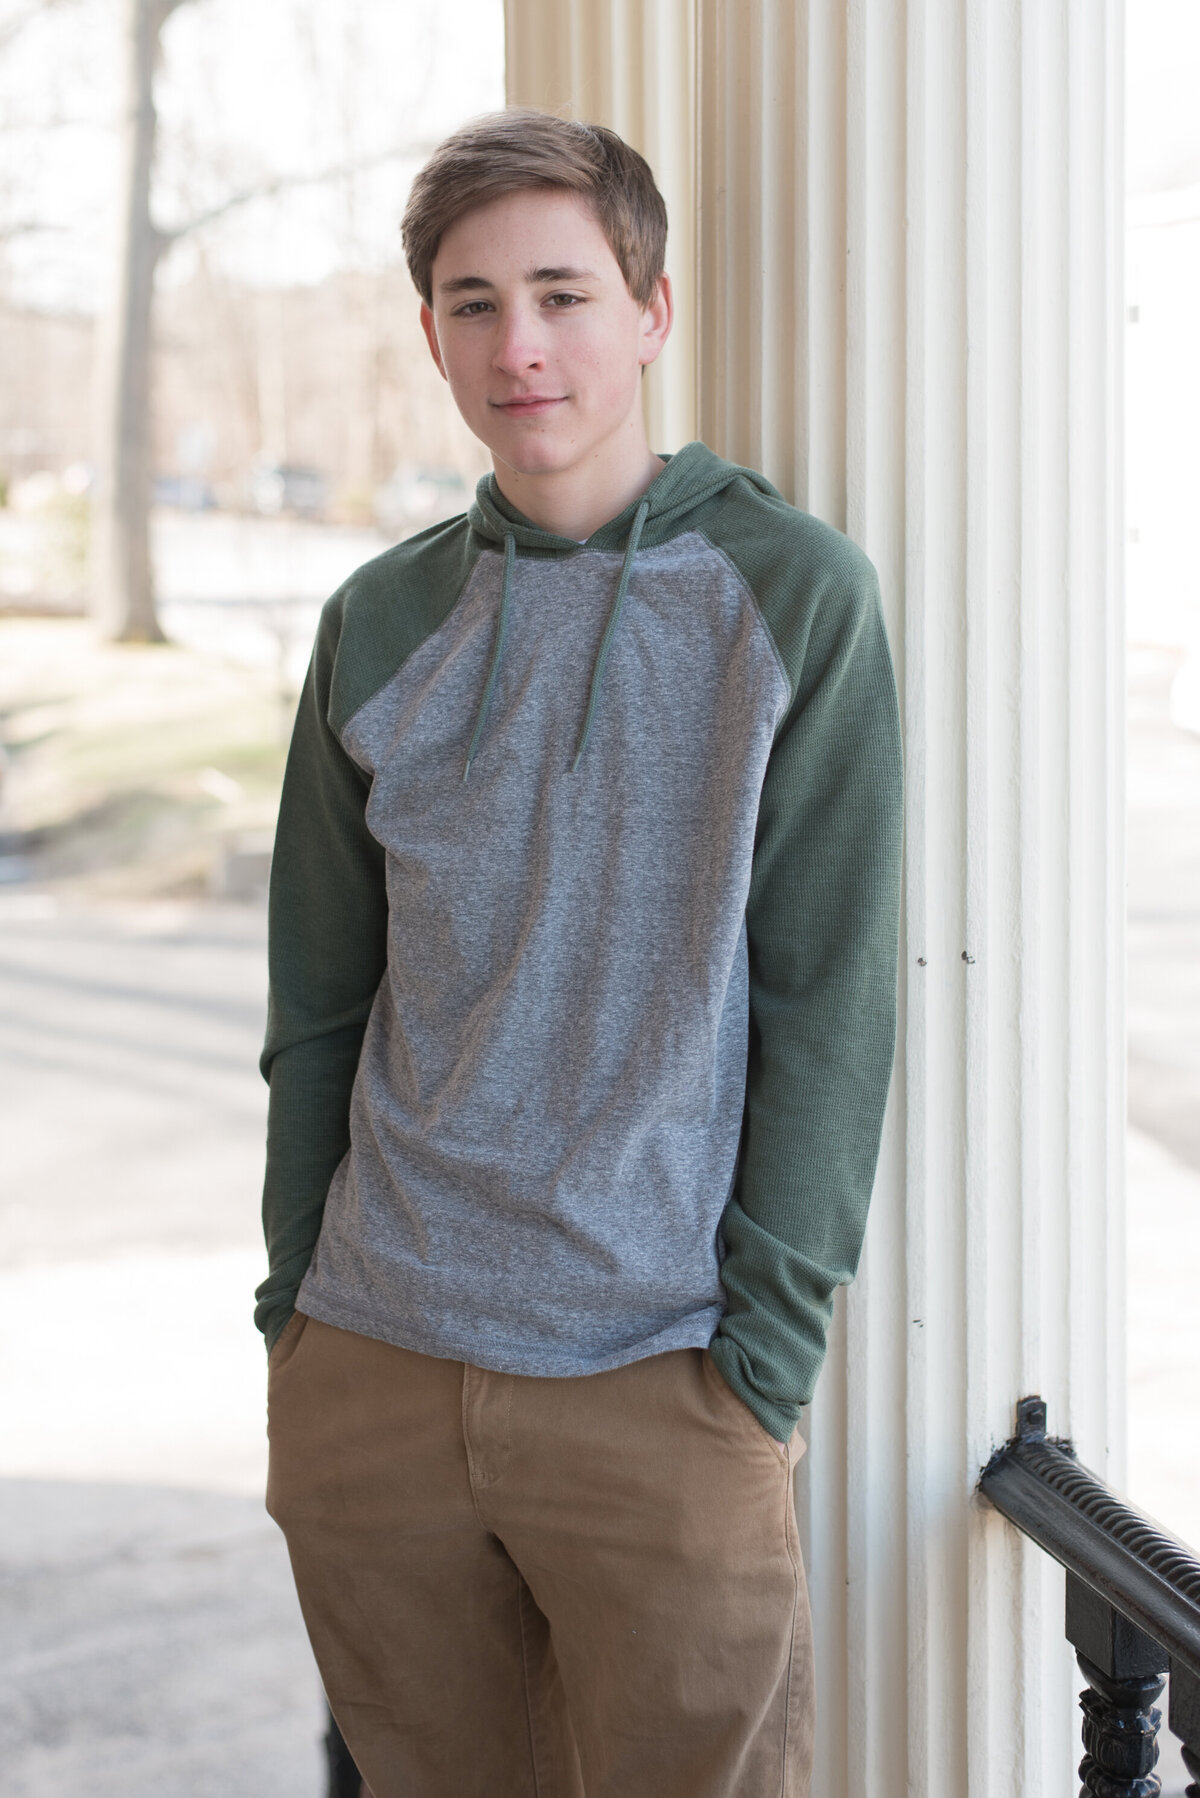 Teen boy with hands in pockets in front of white column